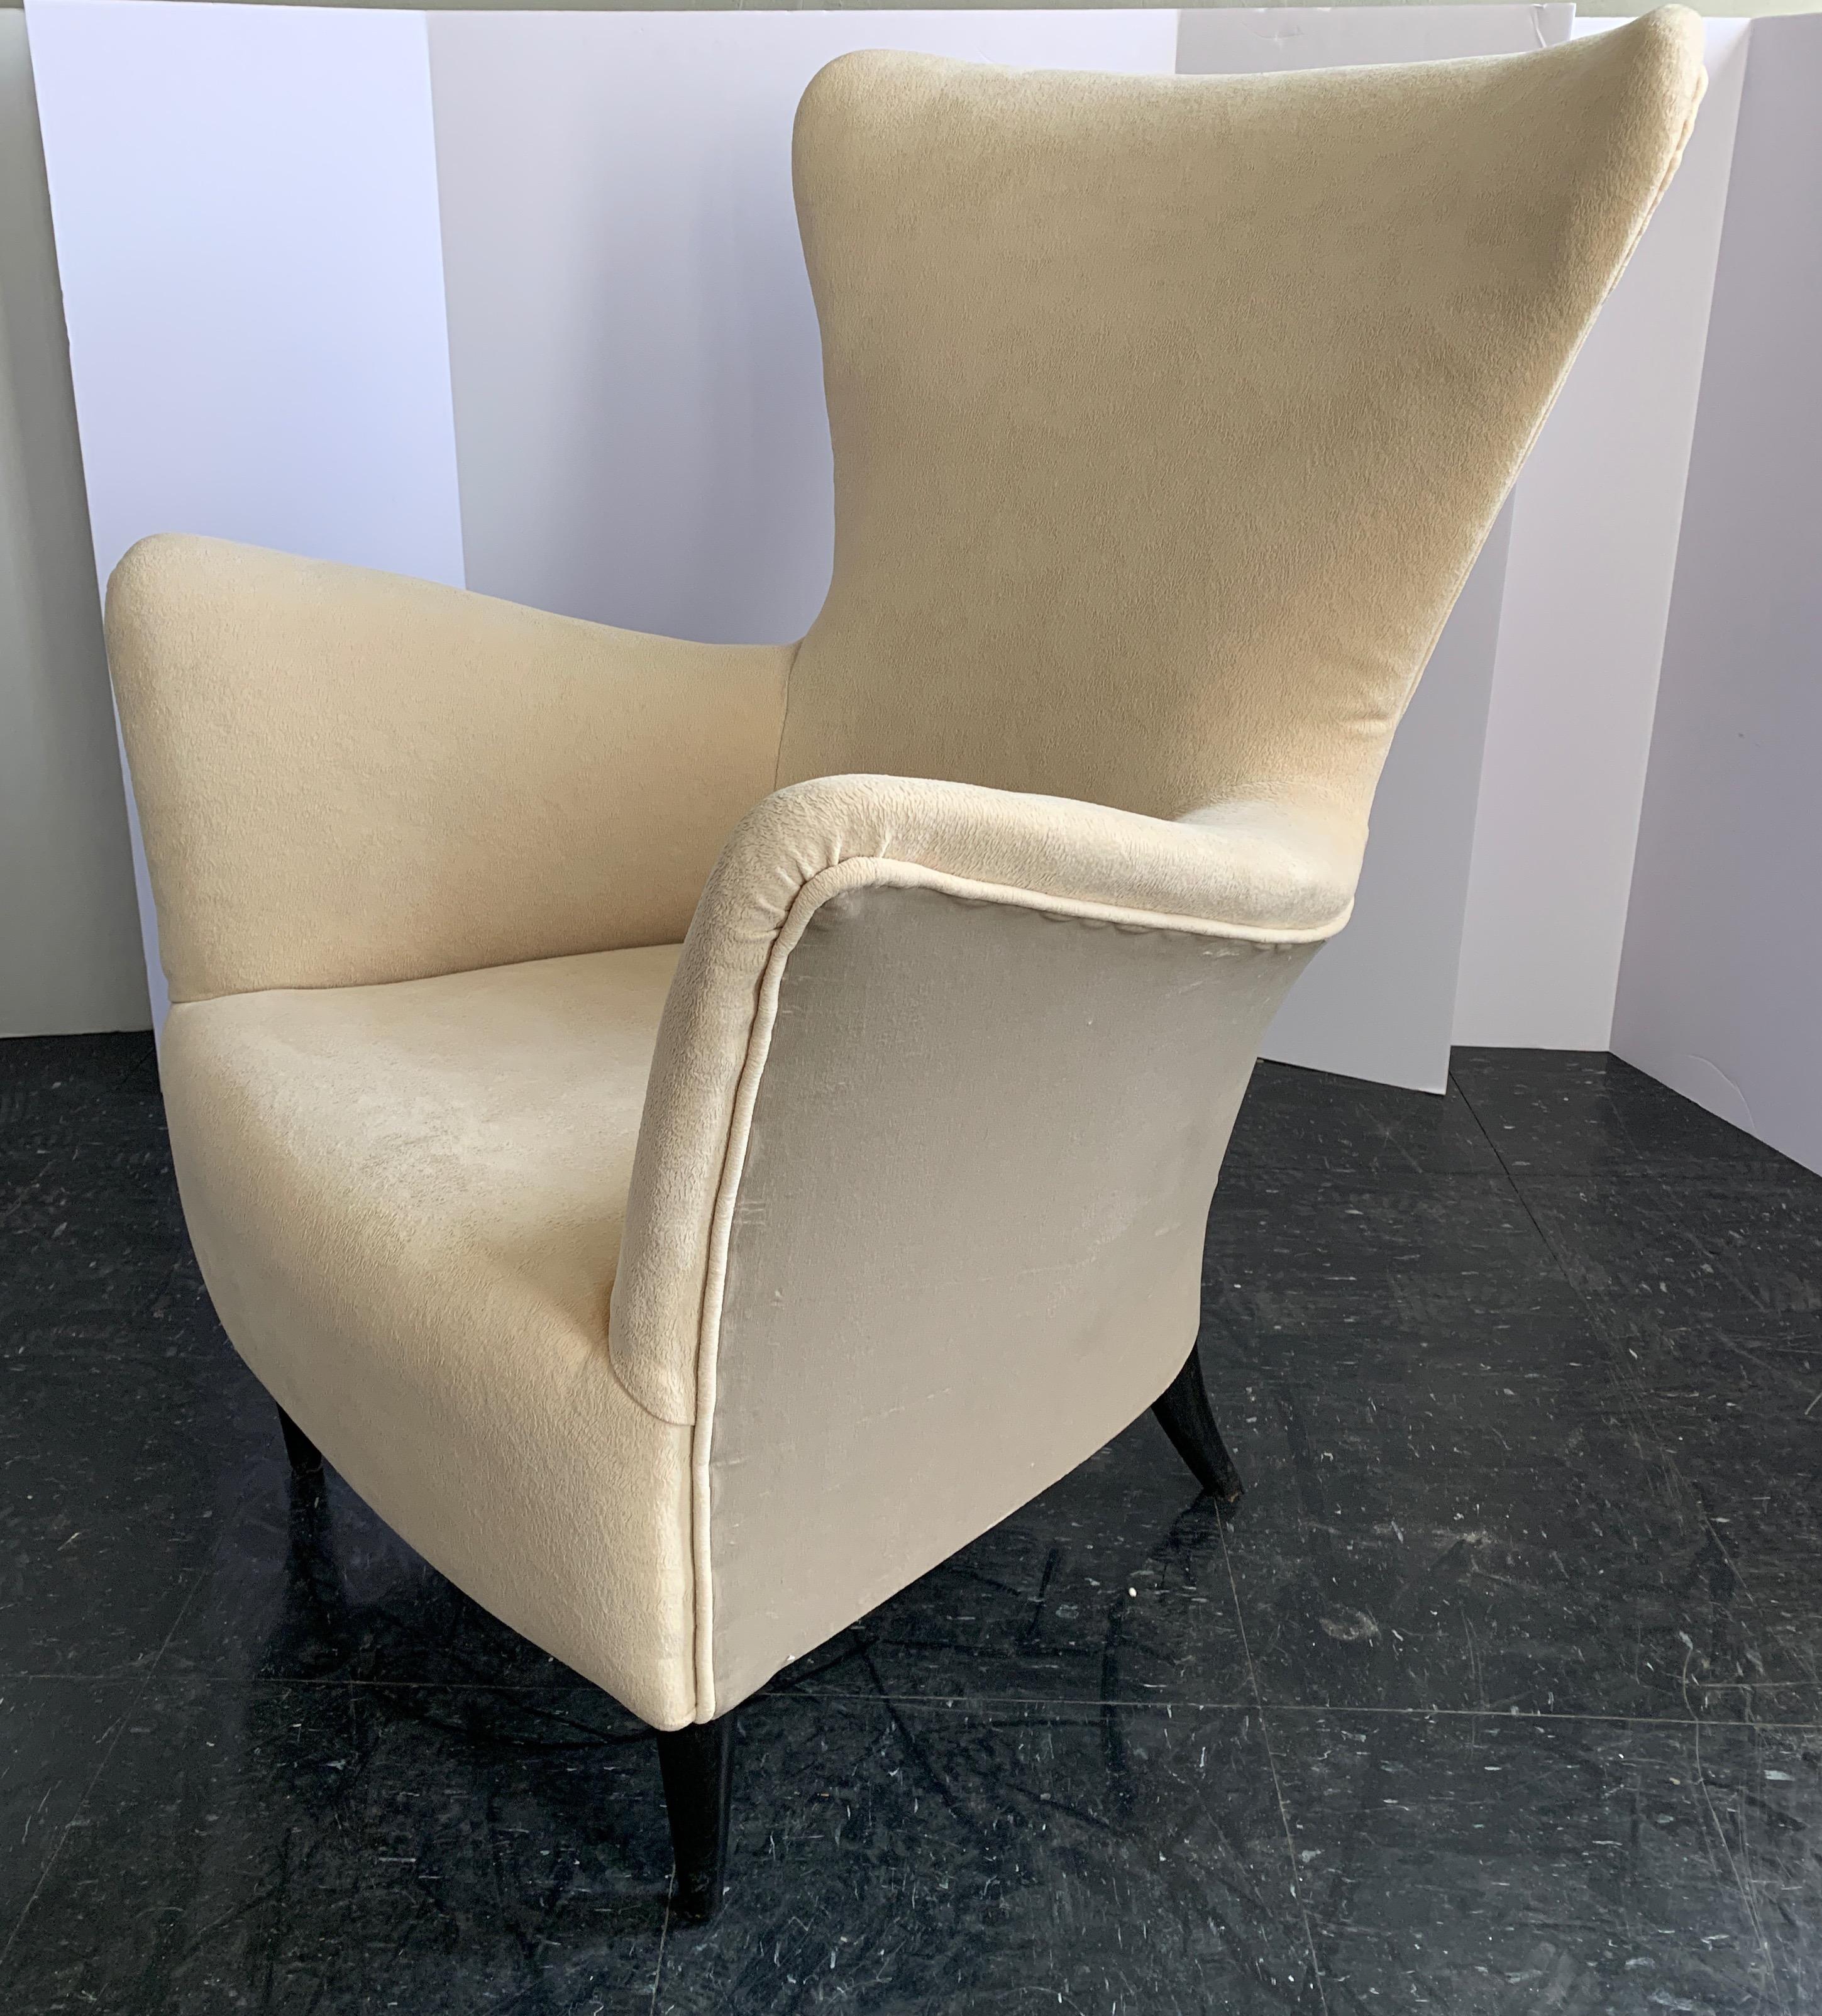 20th Century Midcentury Italian Gio Ponti Armchairs with Later Upholstery